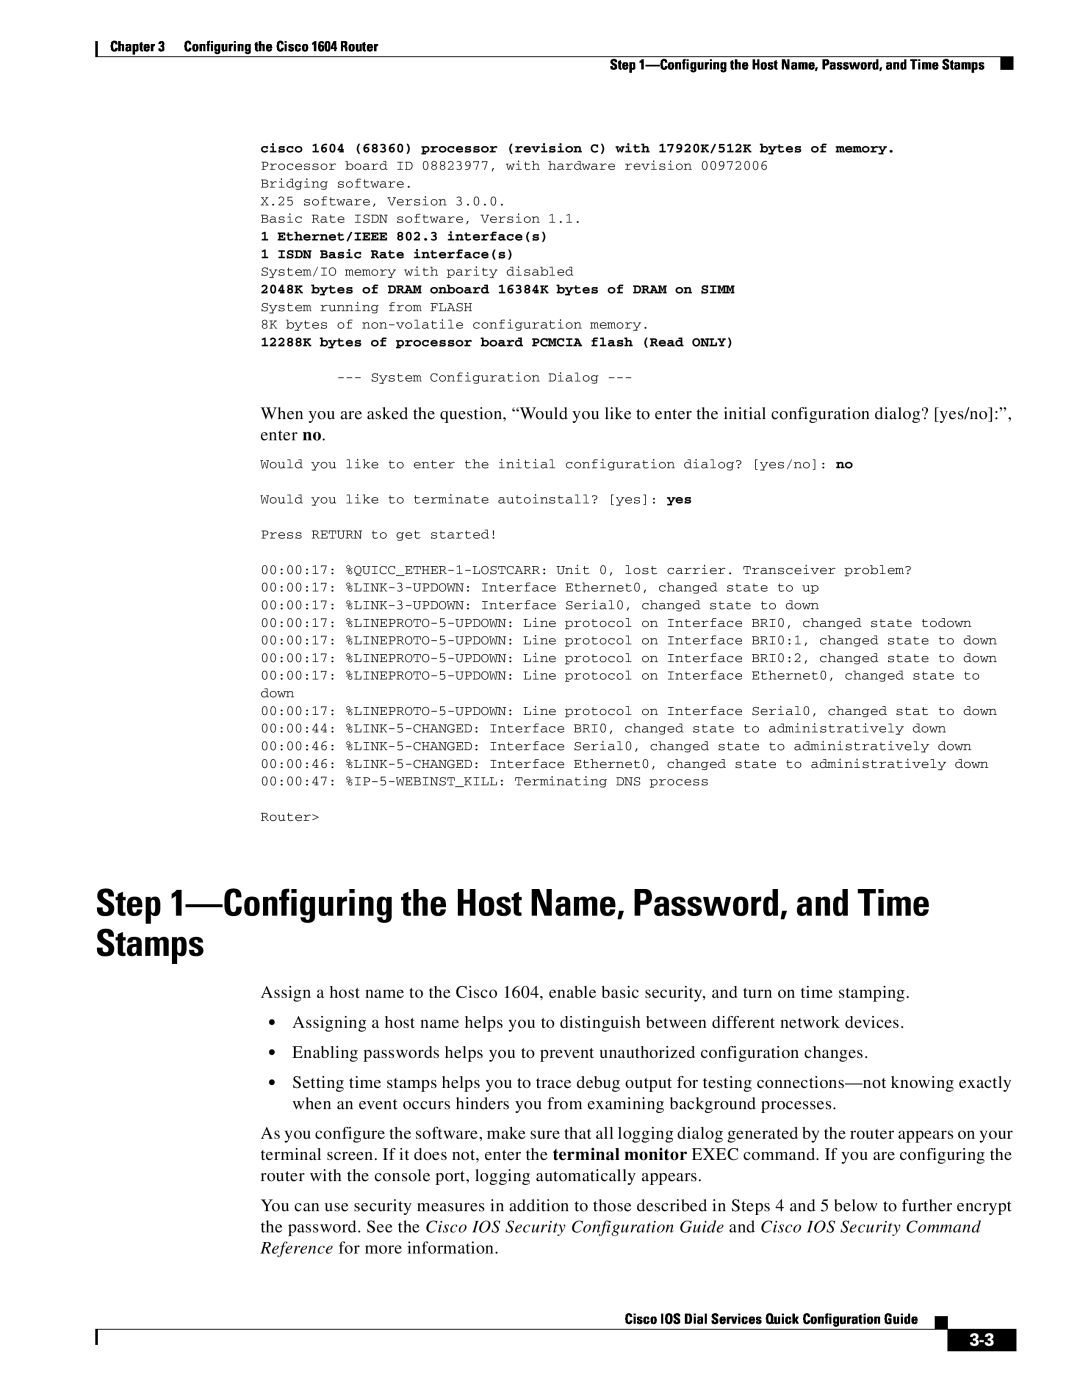 Cisco Systems 1604 manual Configuring the Host Name, Password, and Time Stamps 